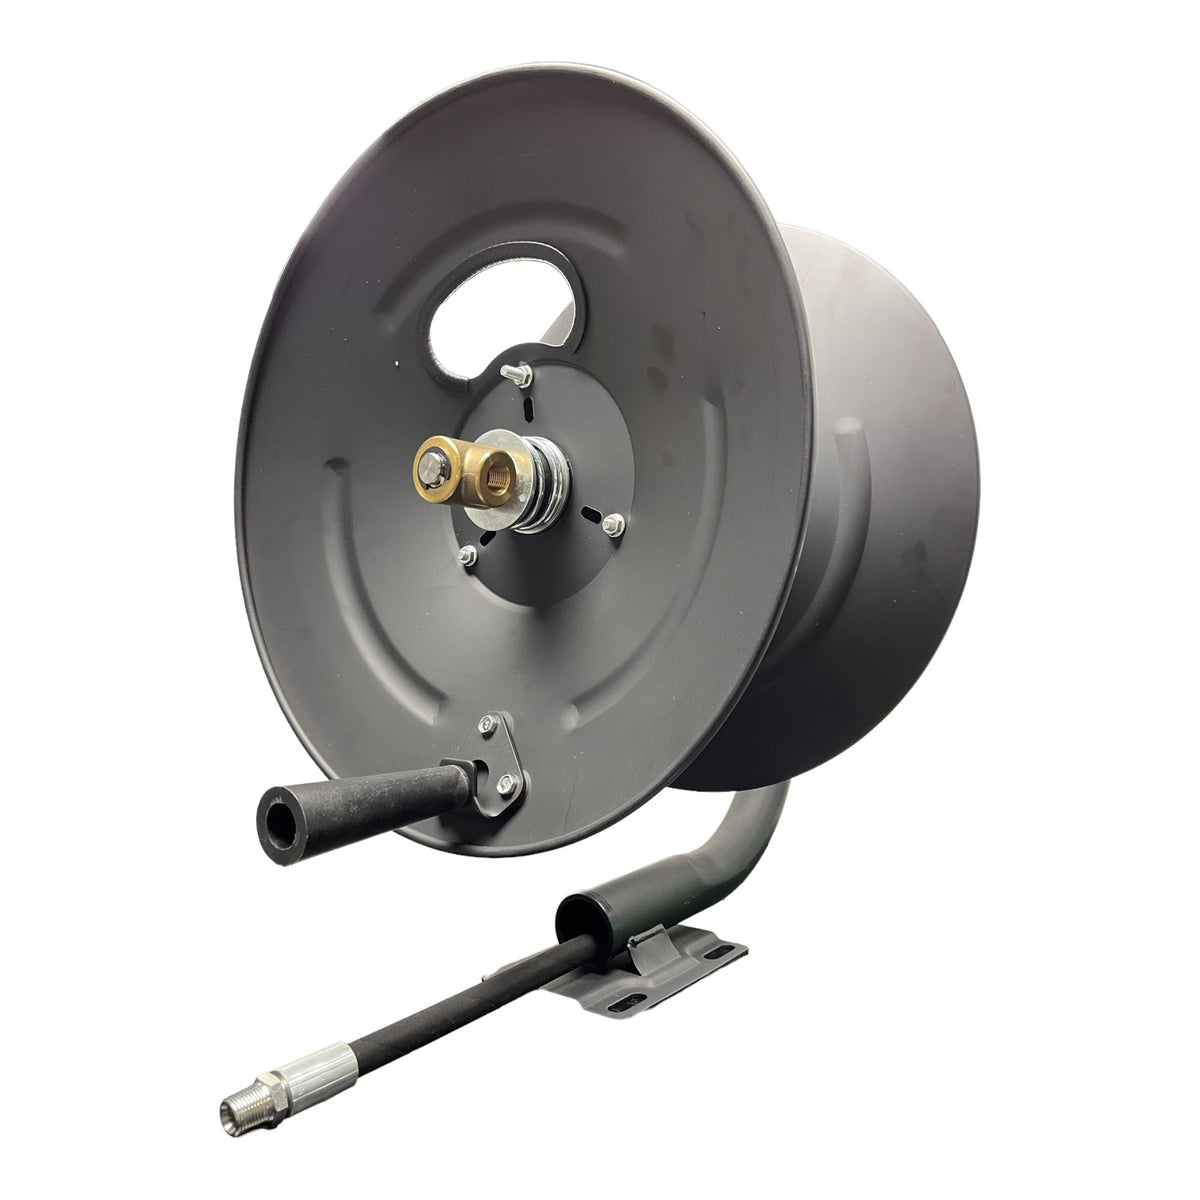 Interstate Pneumatics PW7190 3/8 inch x 100' Steel Hose Reel with Swivel Fitting Mounting Bracket and 3' Pigtail